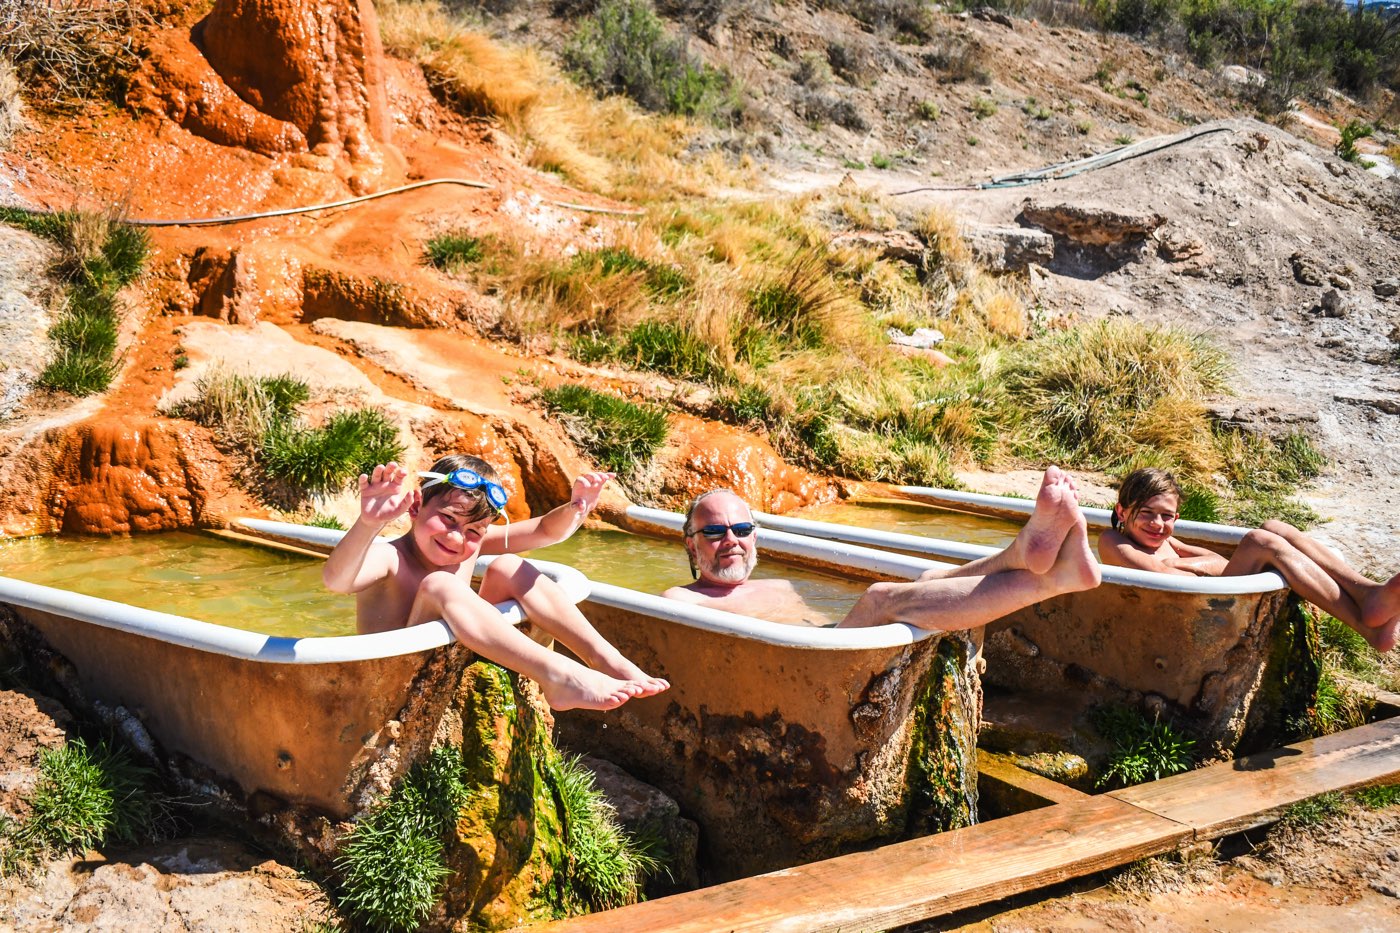 MYSTIC HOT SPRINGS: A CHILL AF EXPERIENCE FOR HIPPIES, FREE SPIRITS... AND FAMILIES